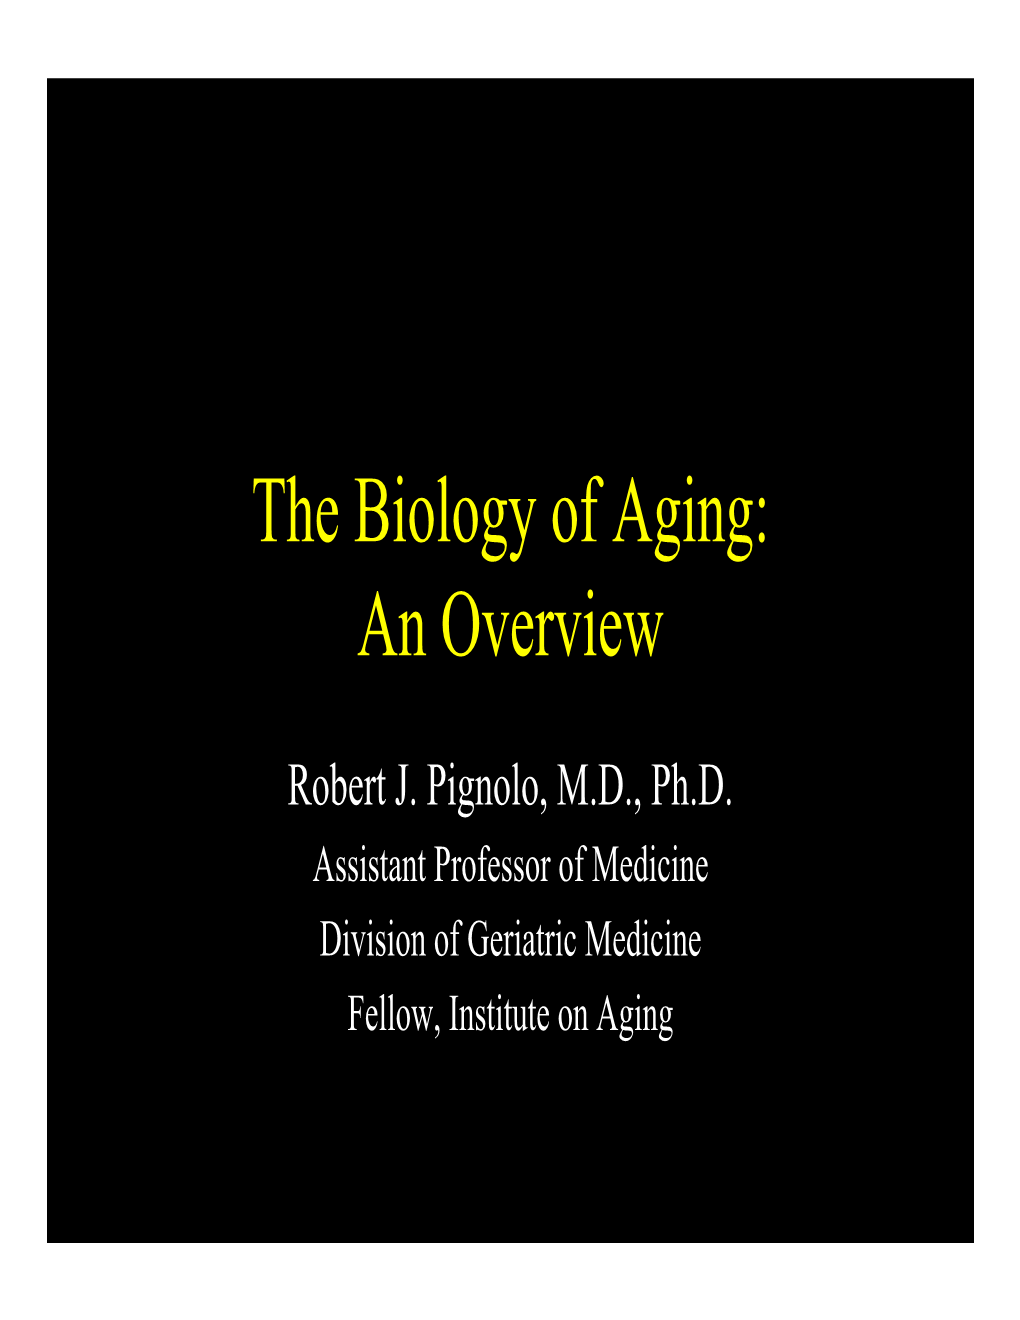 The Biology of Aging: an Overview